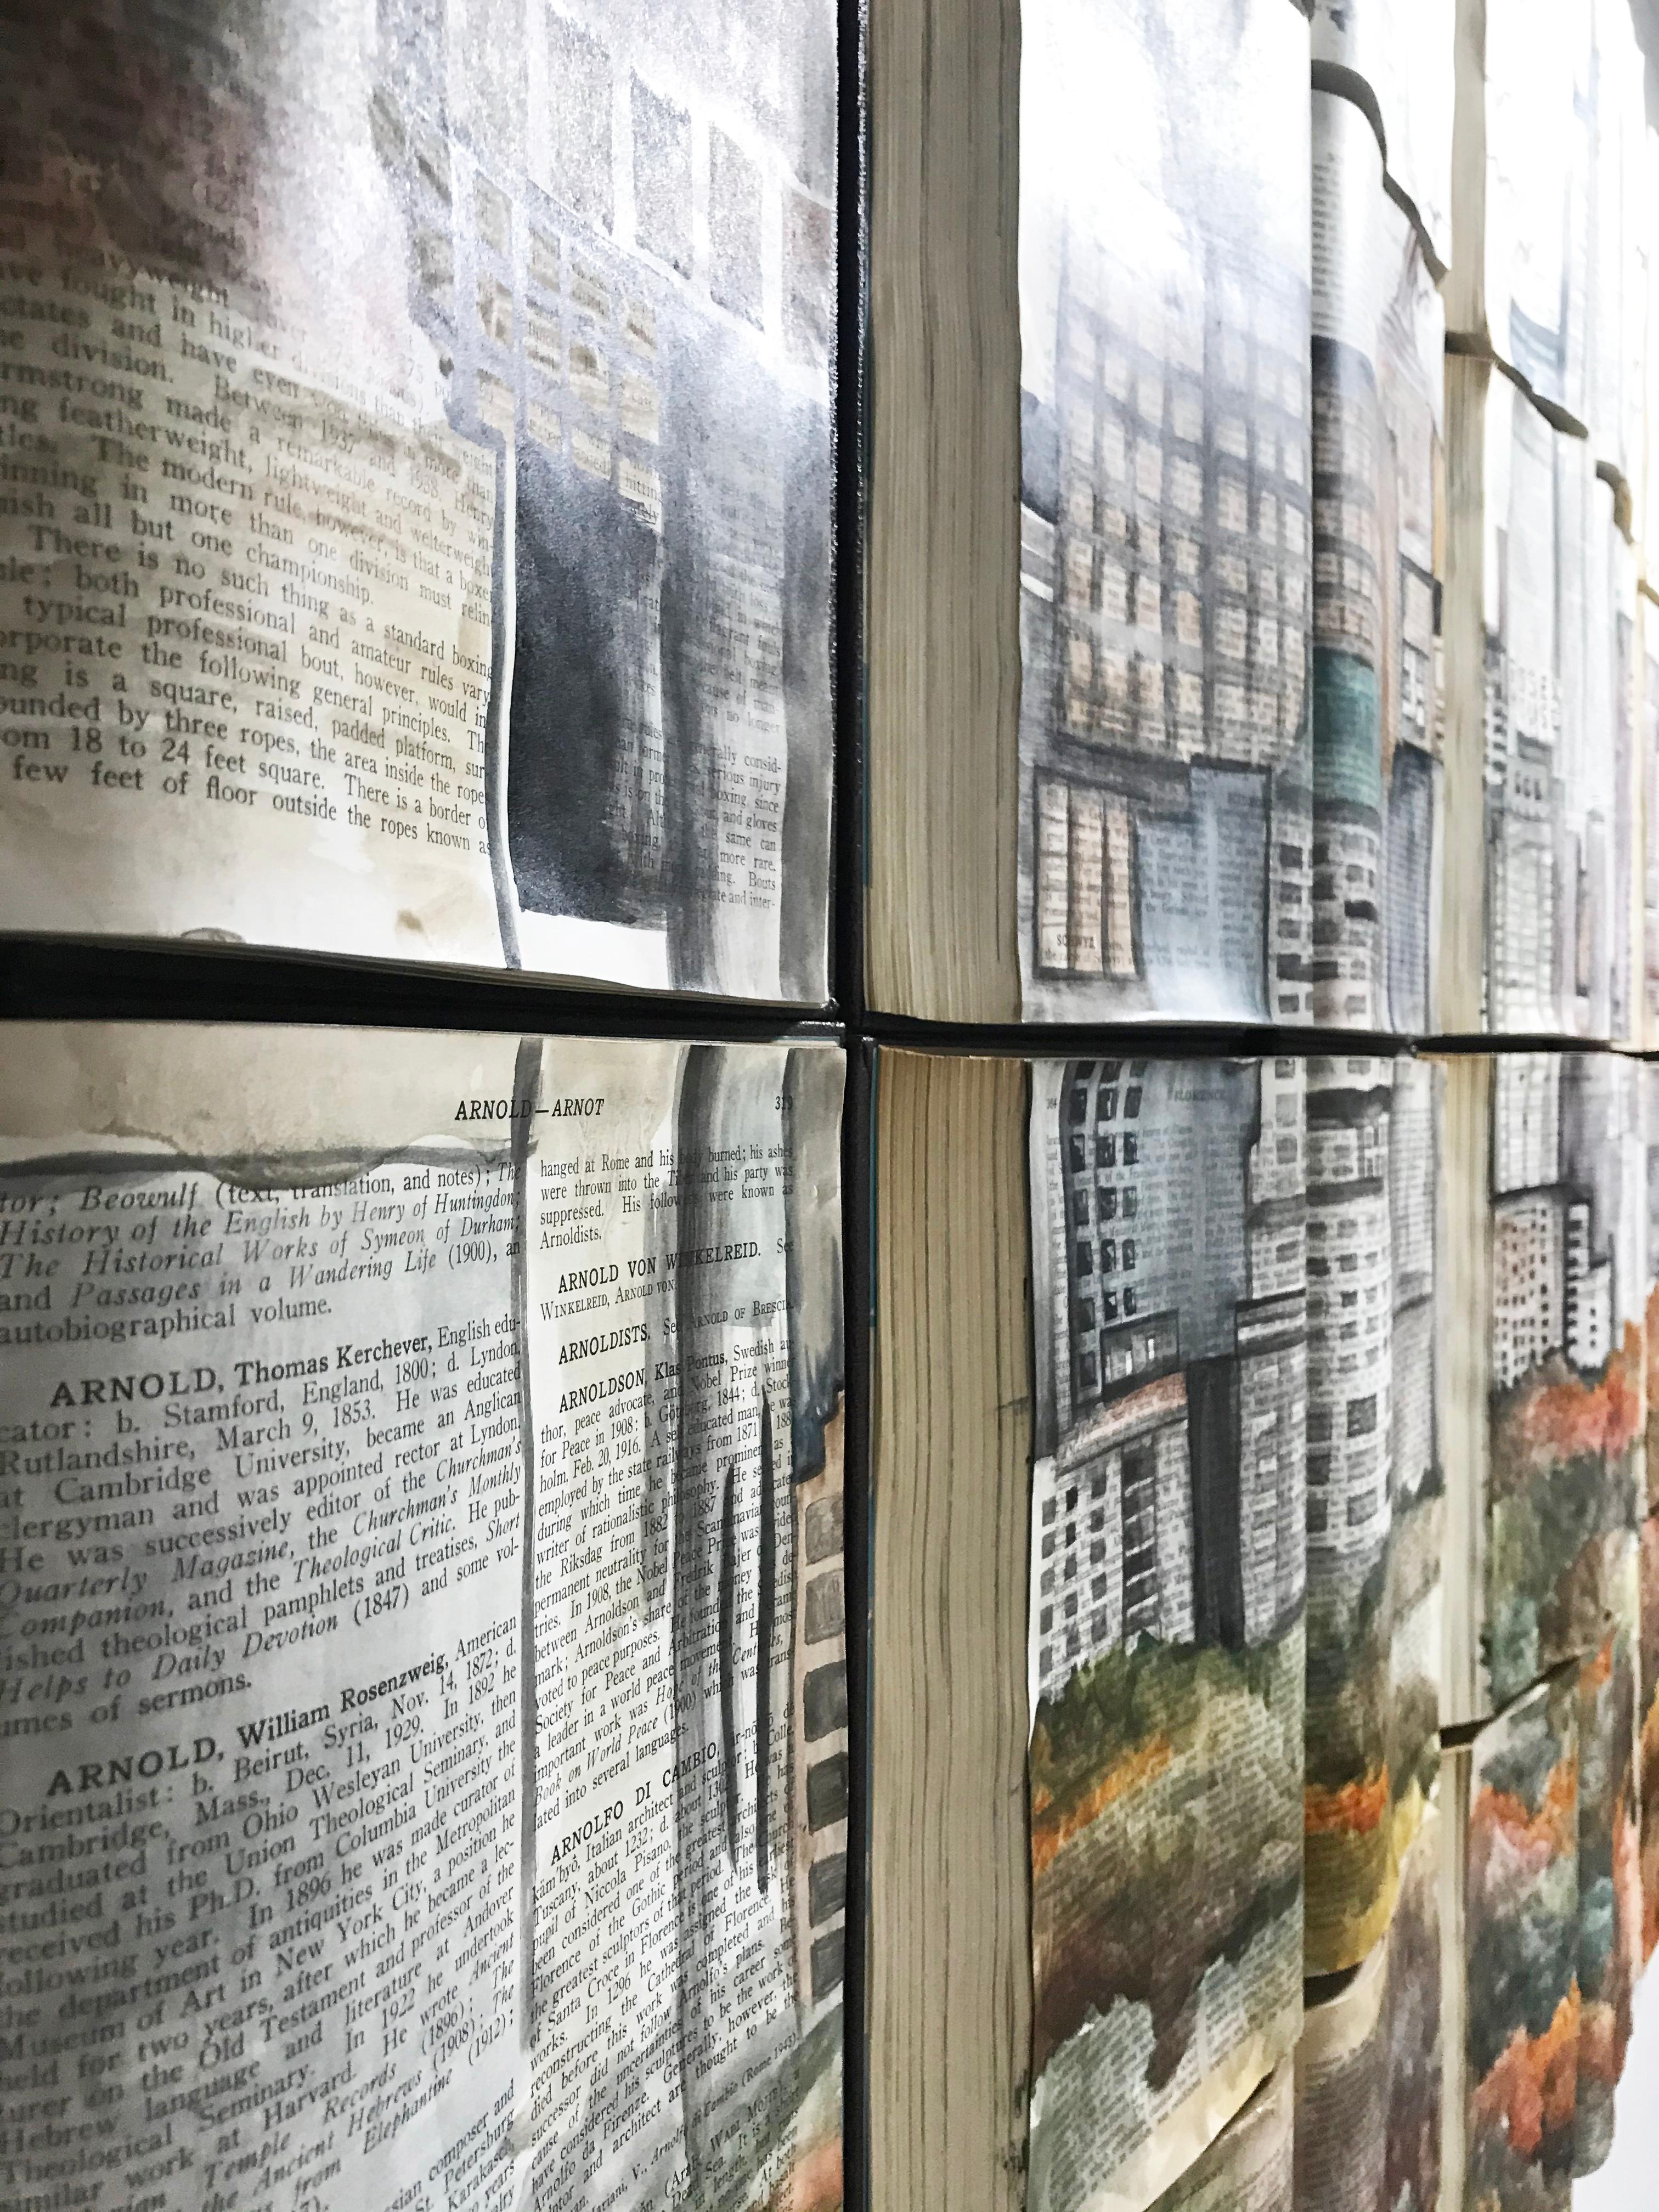 The two artists and industrial designers, María Amparo Arozarena and Elena De La Fuente focus their art on creating 3d textures using diverse materials. This unique book canvass was made with abandonded books they found at an antique place in the